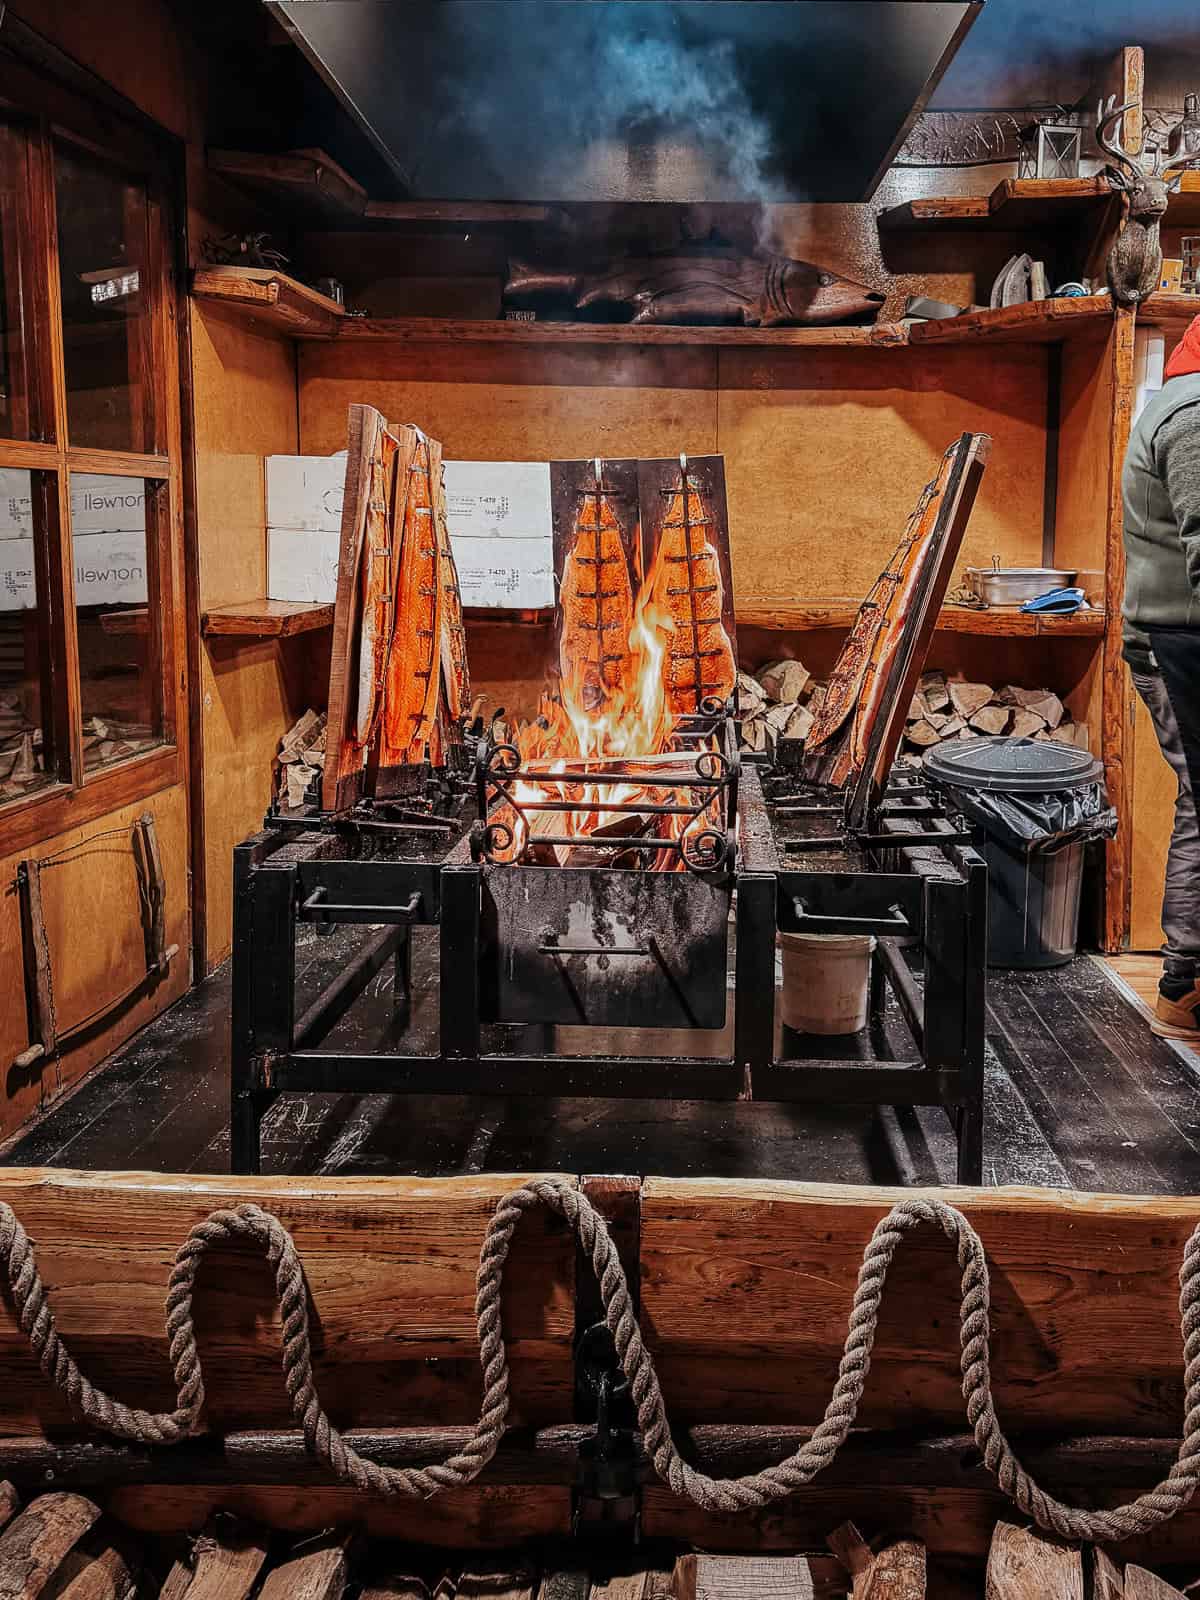 Fresh salmon fillets cooking on a unique vertical open fire grill, surrounded by a rustic wooden frame and smoke extraction setup at a market stall.